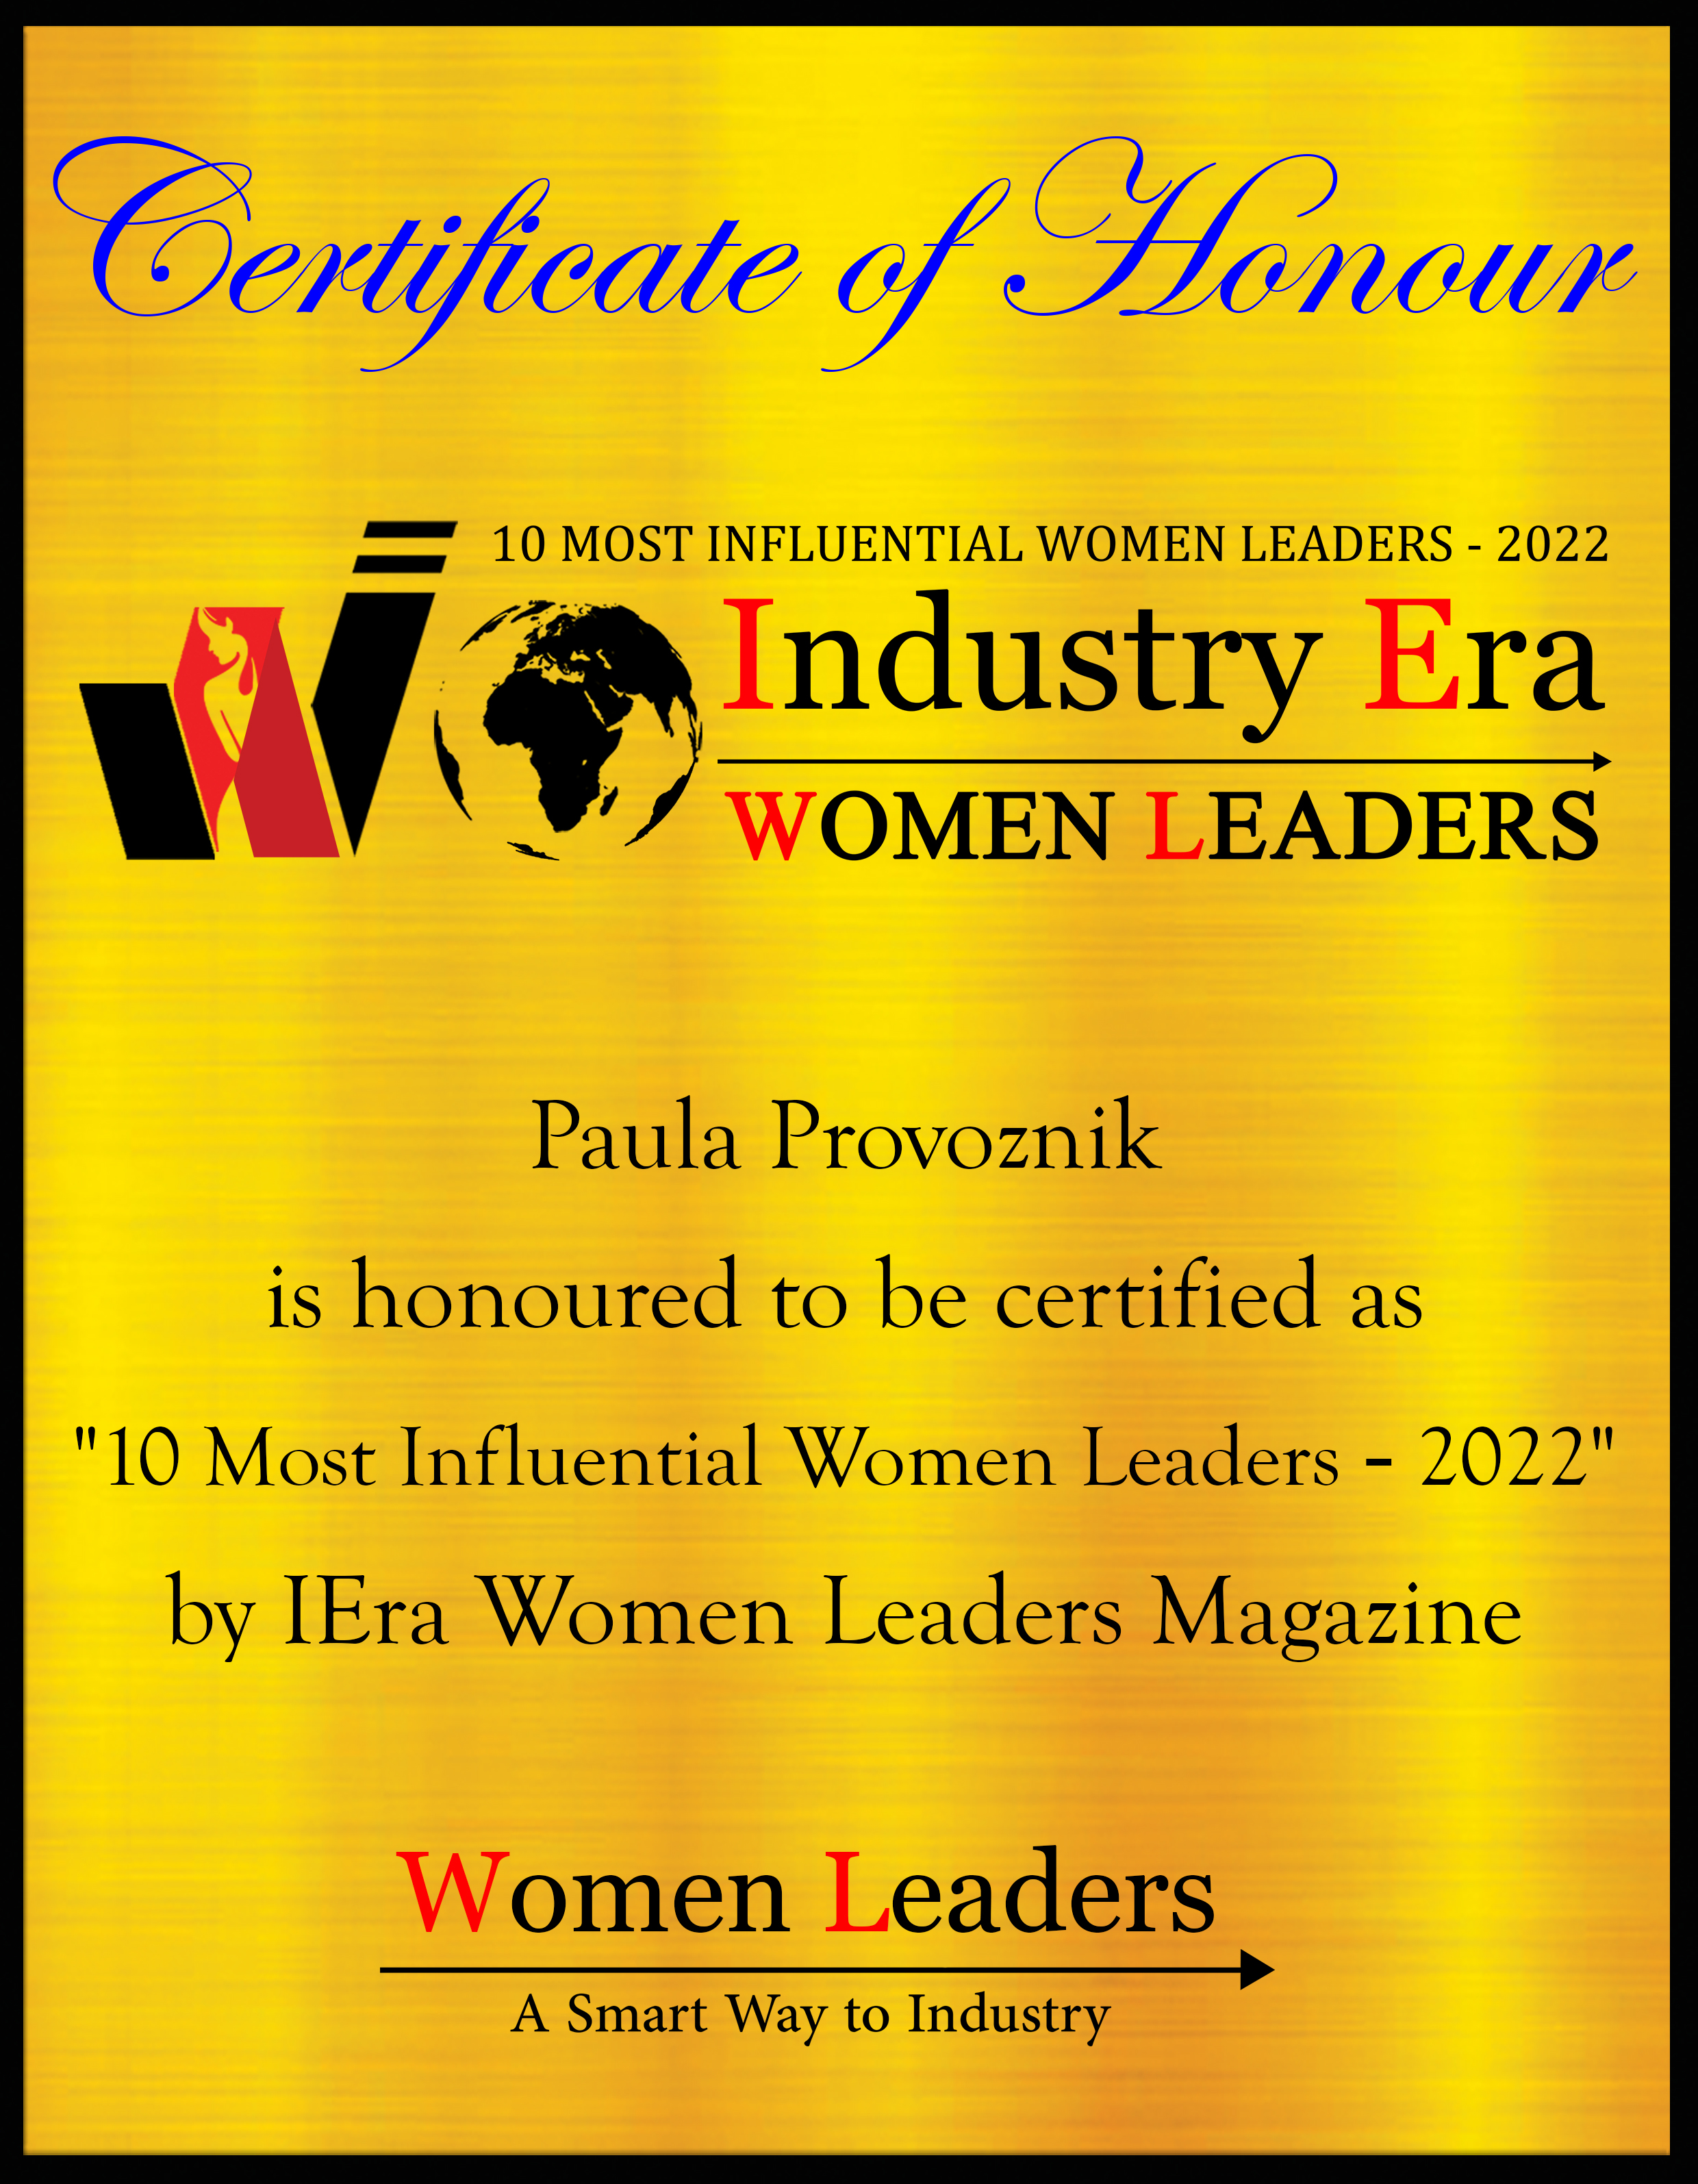 Paula Provoznik, Director of Palo Alto Hills Golf & Country Club, 10 Most Influential Women Leaders of 2022